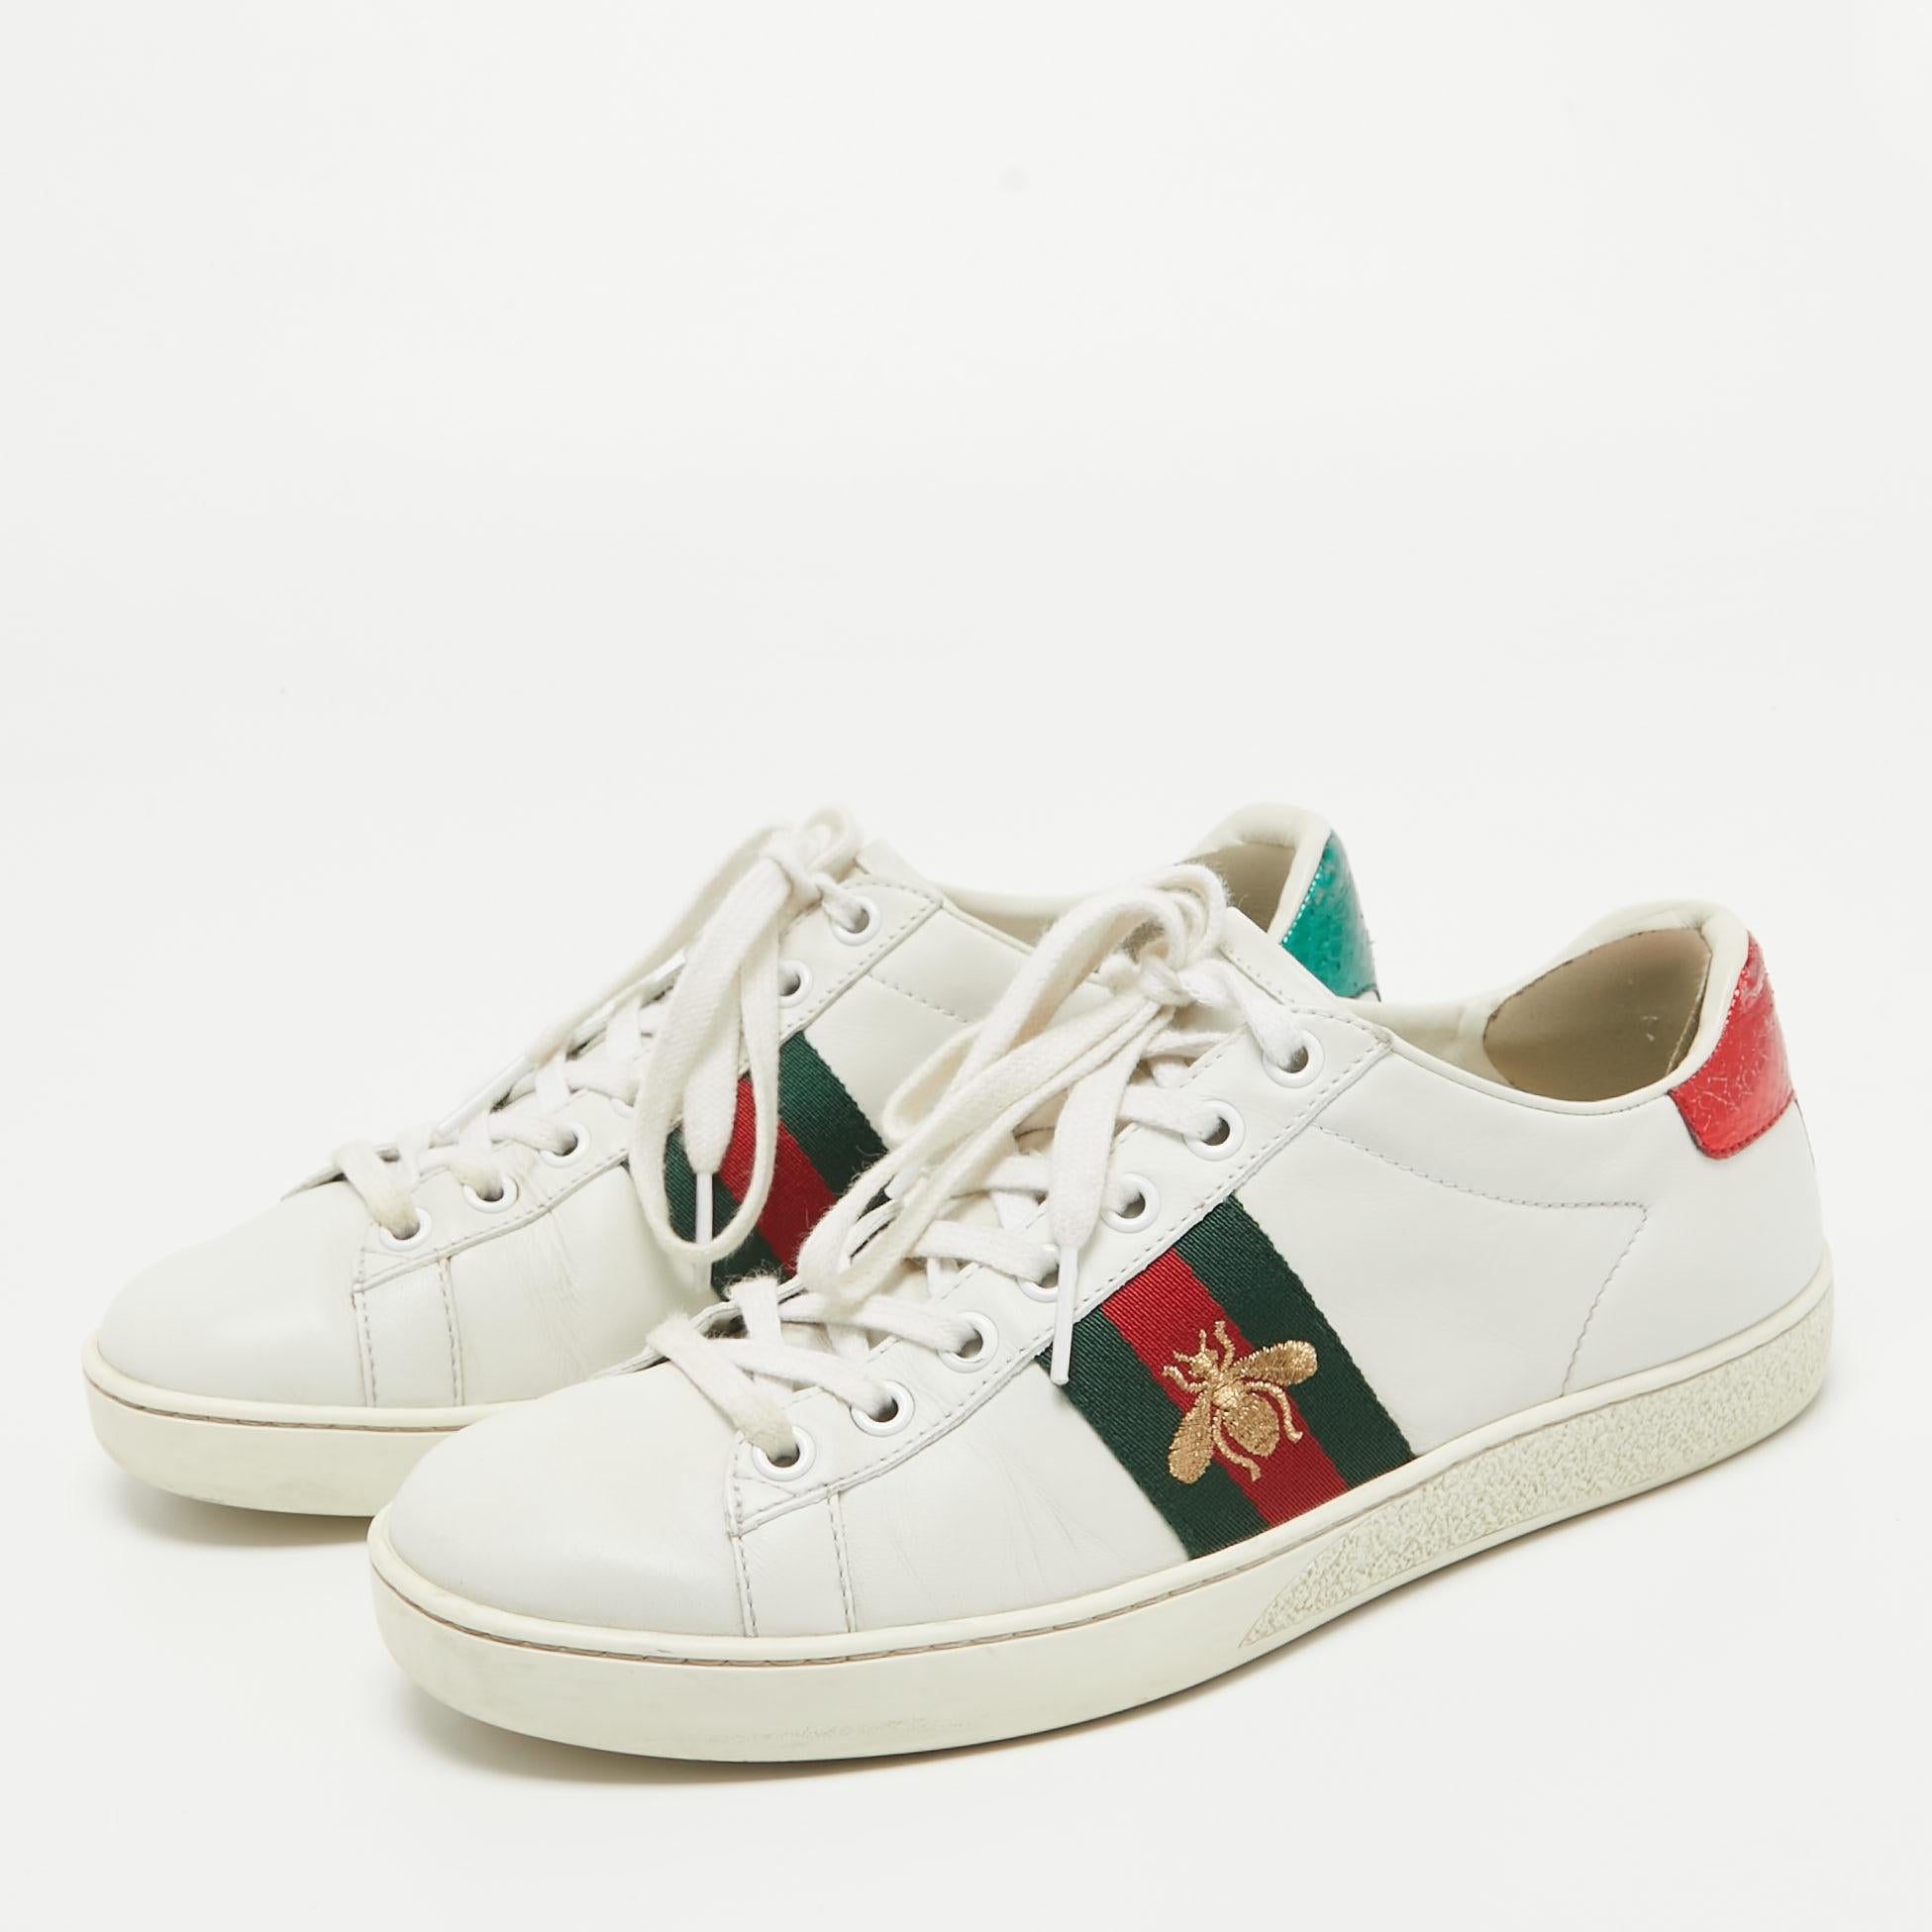 Gucci White Leather Ace Low Top Sneakers Size 37 1